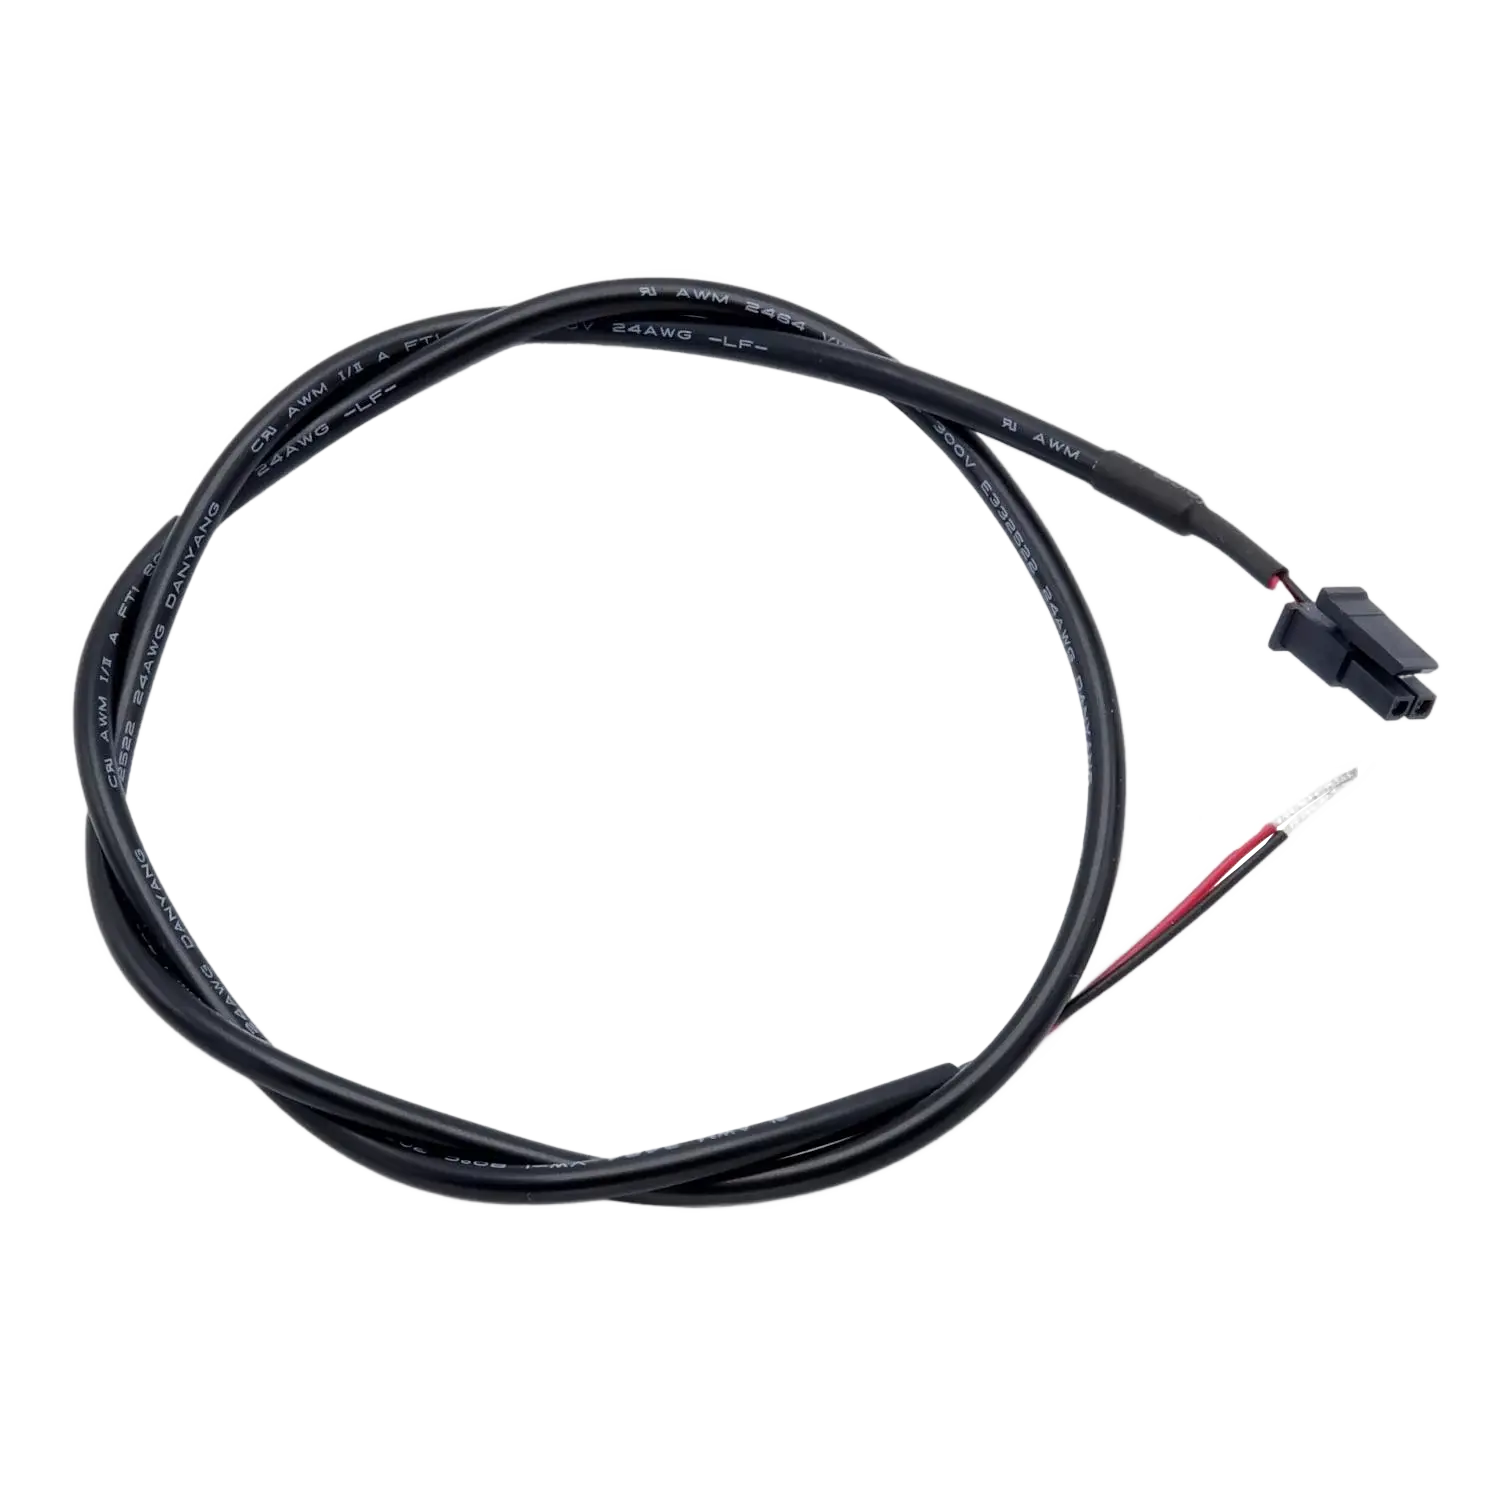 Replacement Power Harness Pigtail for 202 Series Interior Digital Gauge